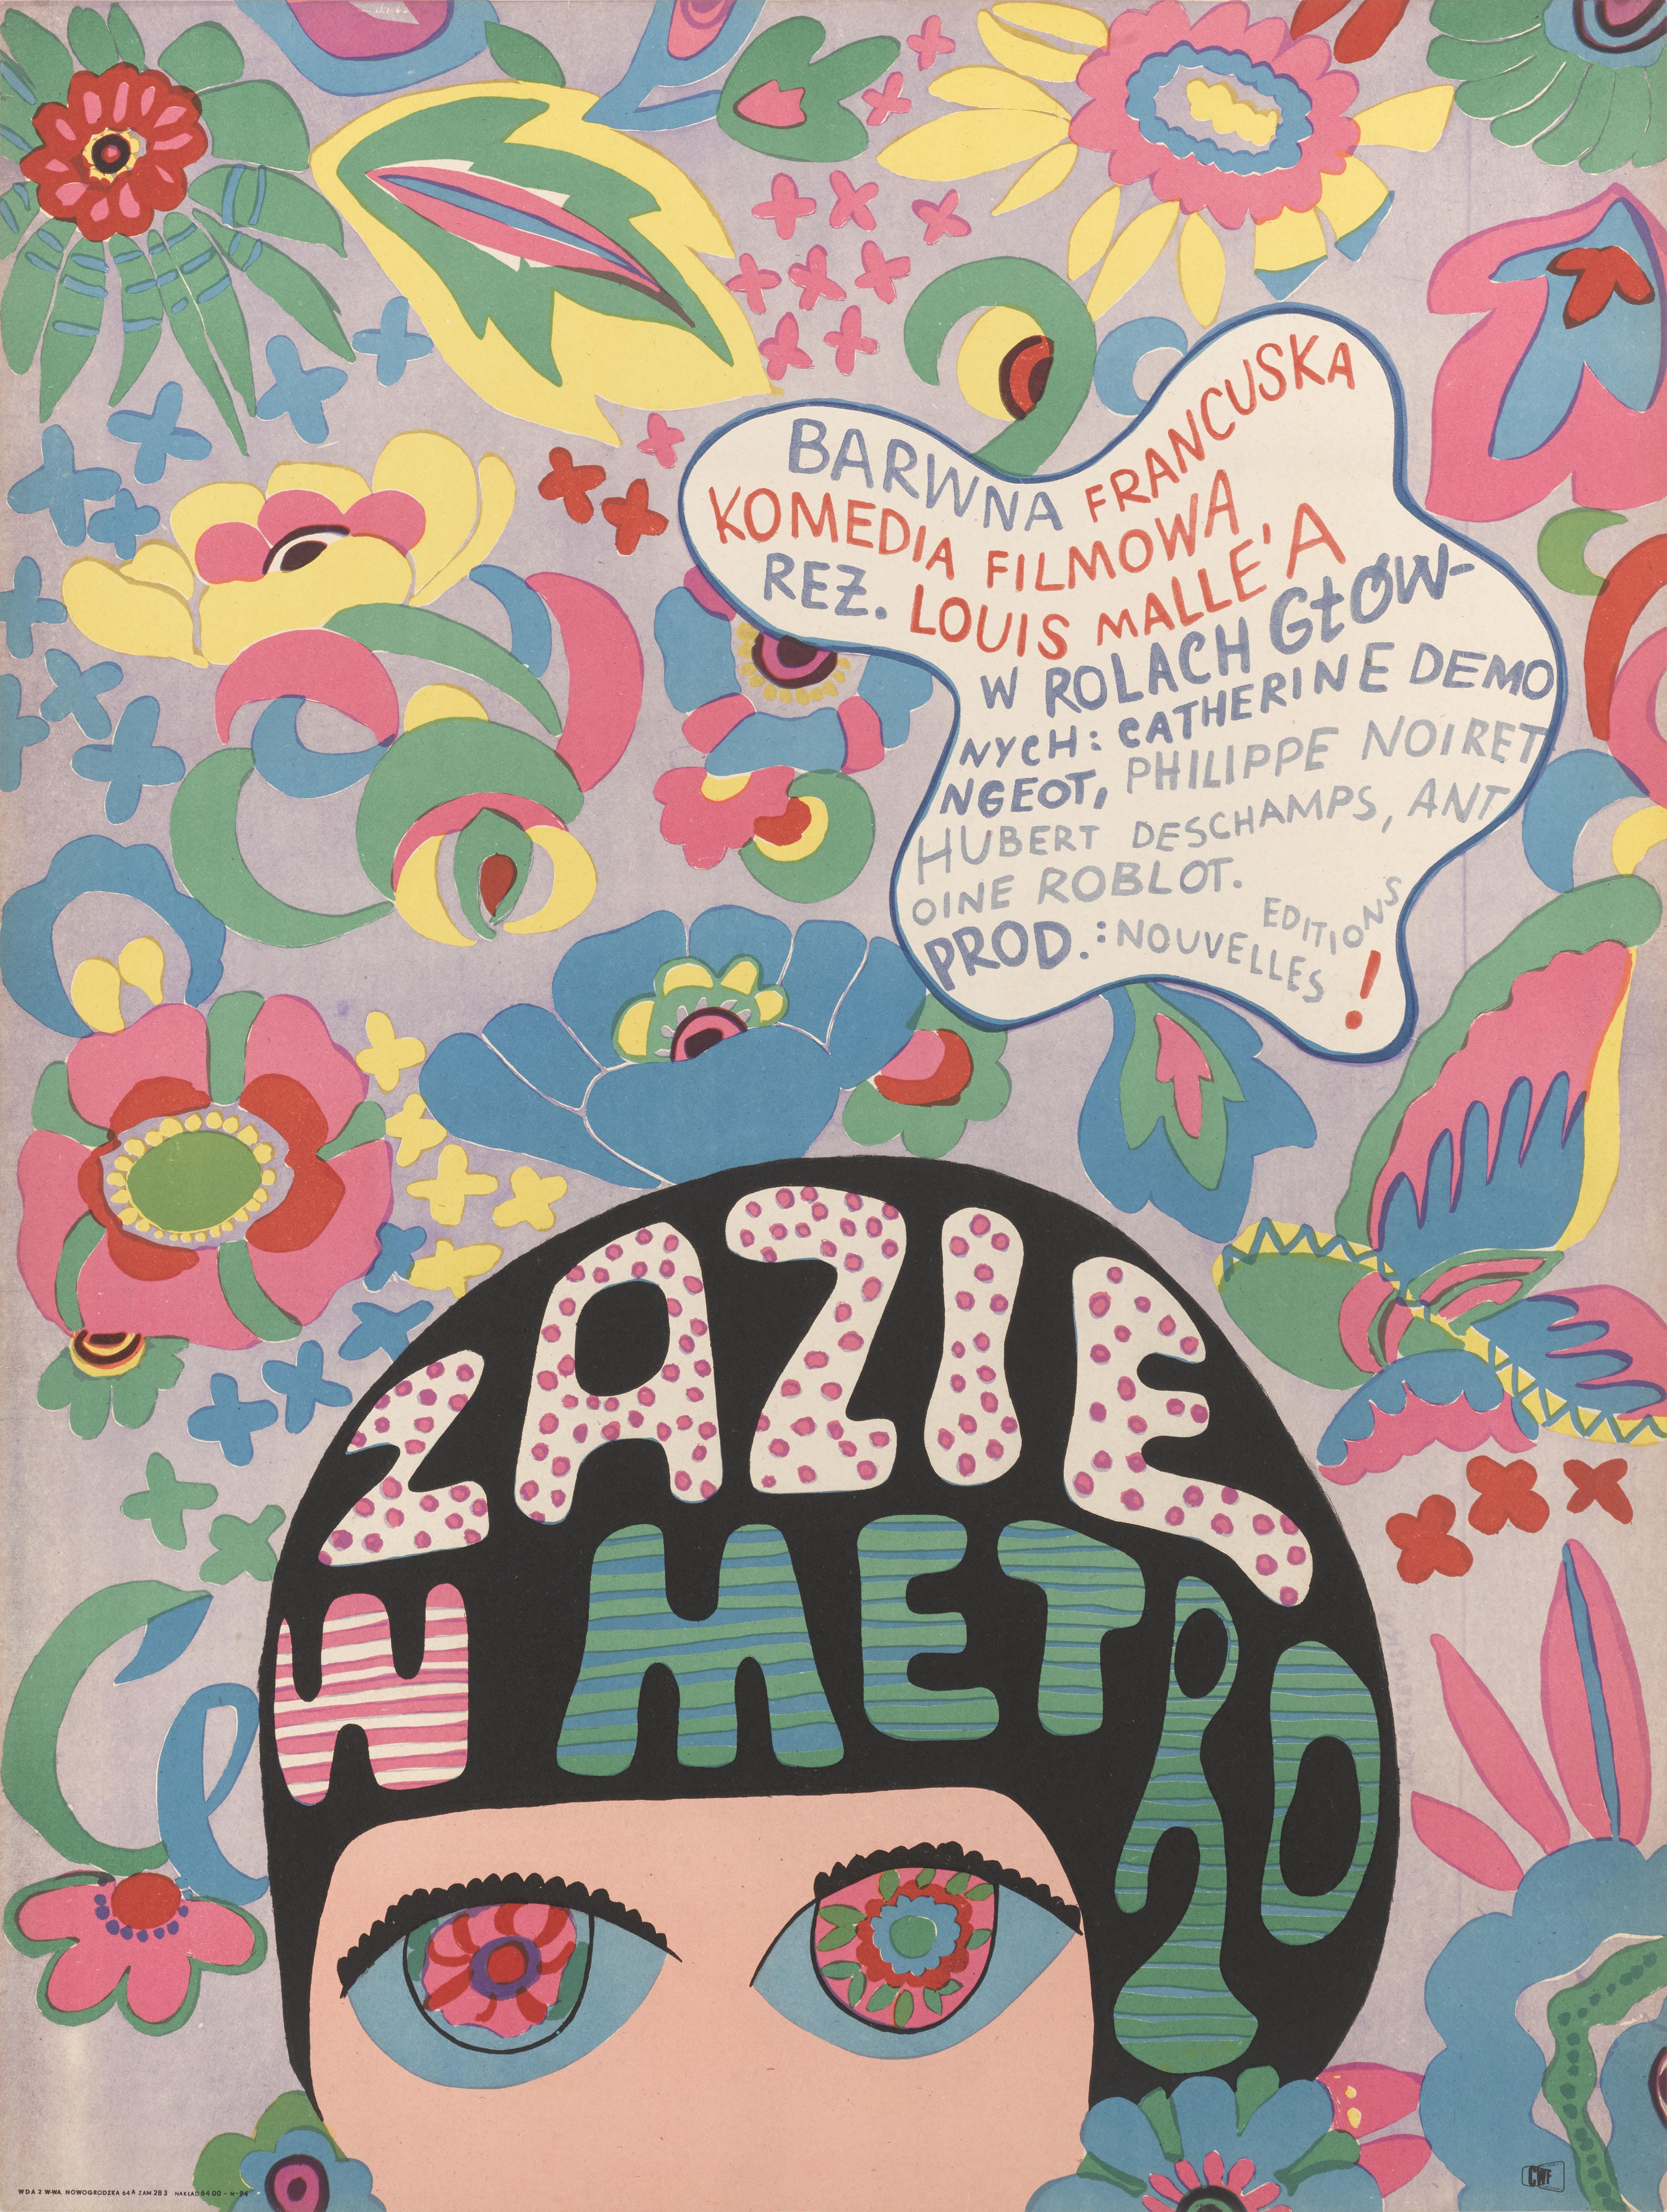 Original Polish film poster for the 1960 French New Wave film directed by Louis Malle and starring Catherine Demongeot, Philippe Noiret, Hubert Deschamps, Vittorio Capriolo and Yvonne Clech.  This beautifully colourful poster designed by the Polish